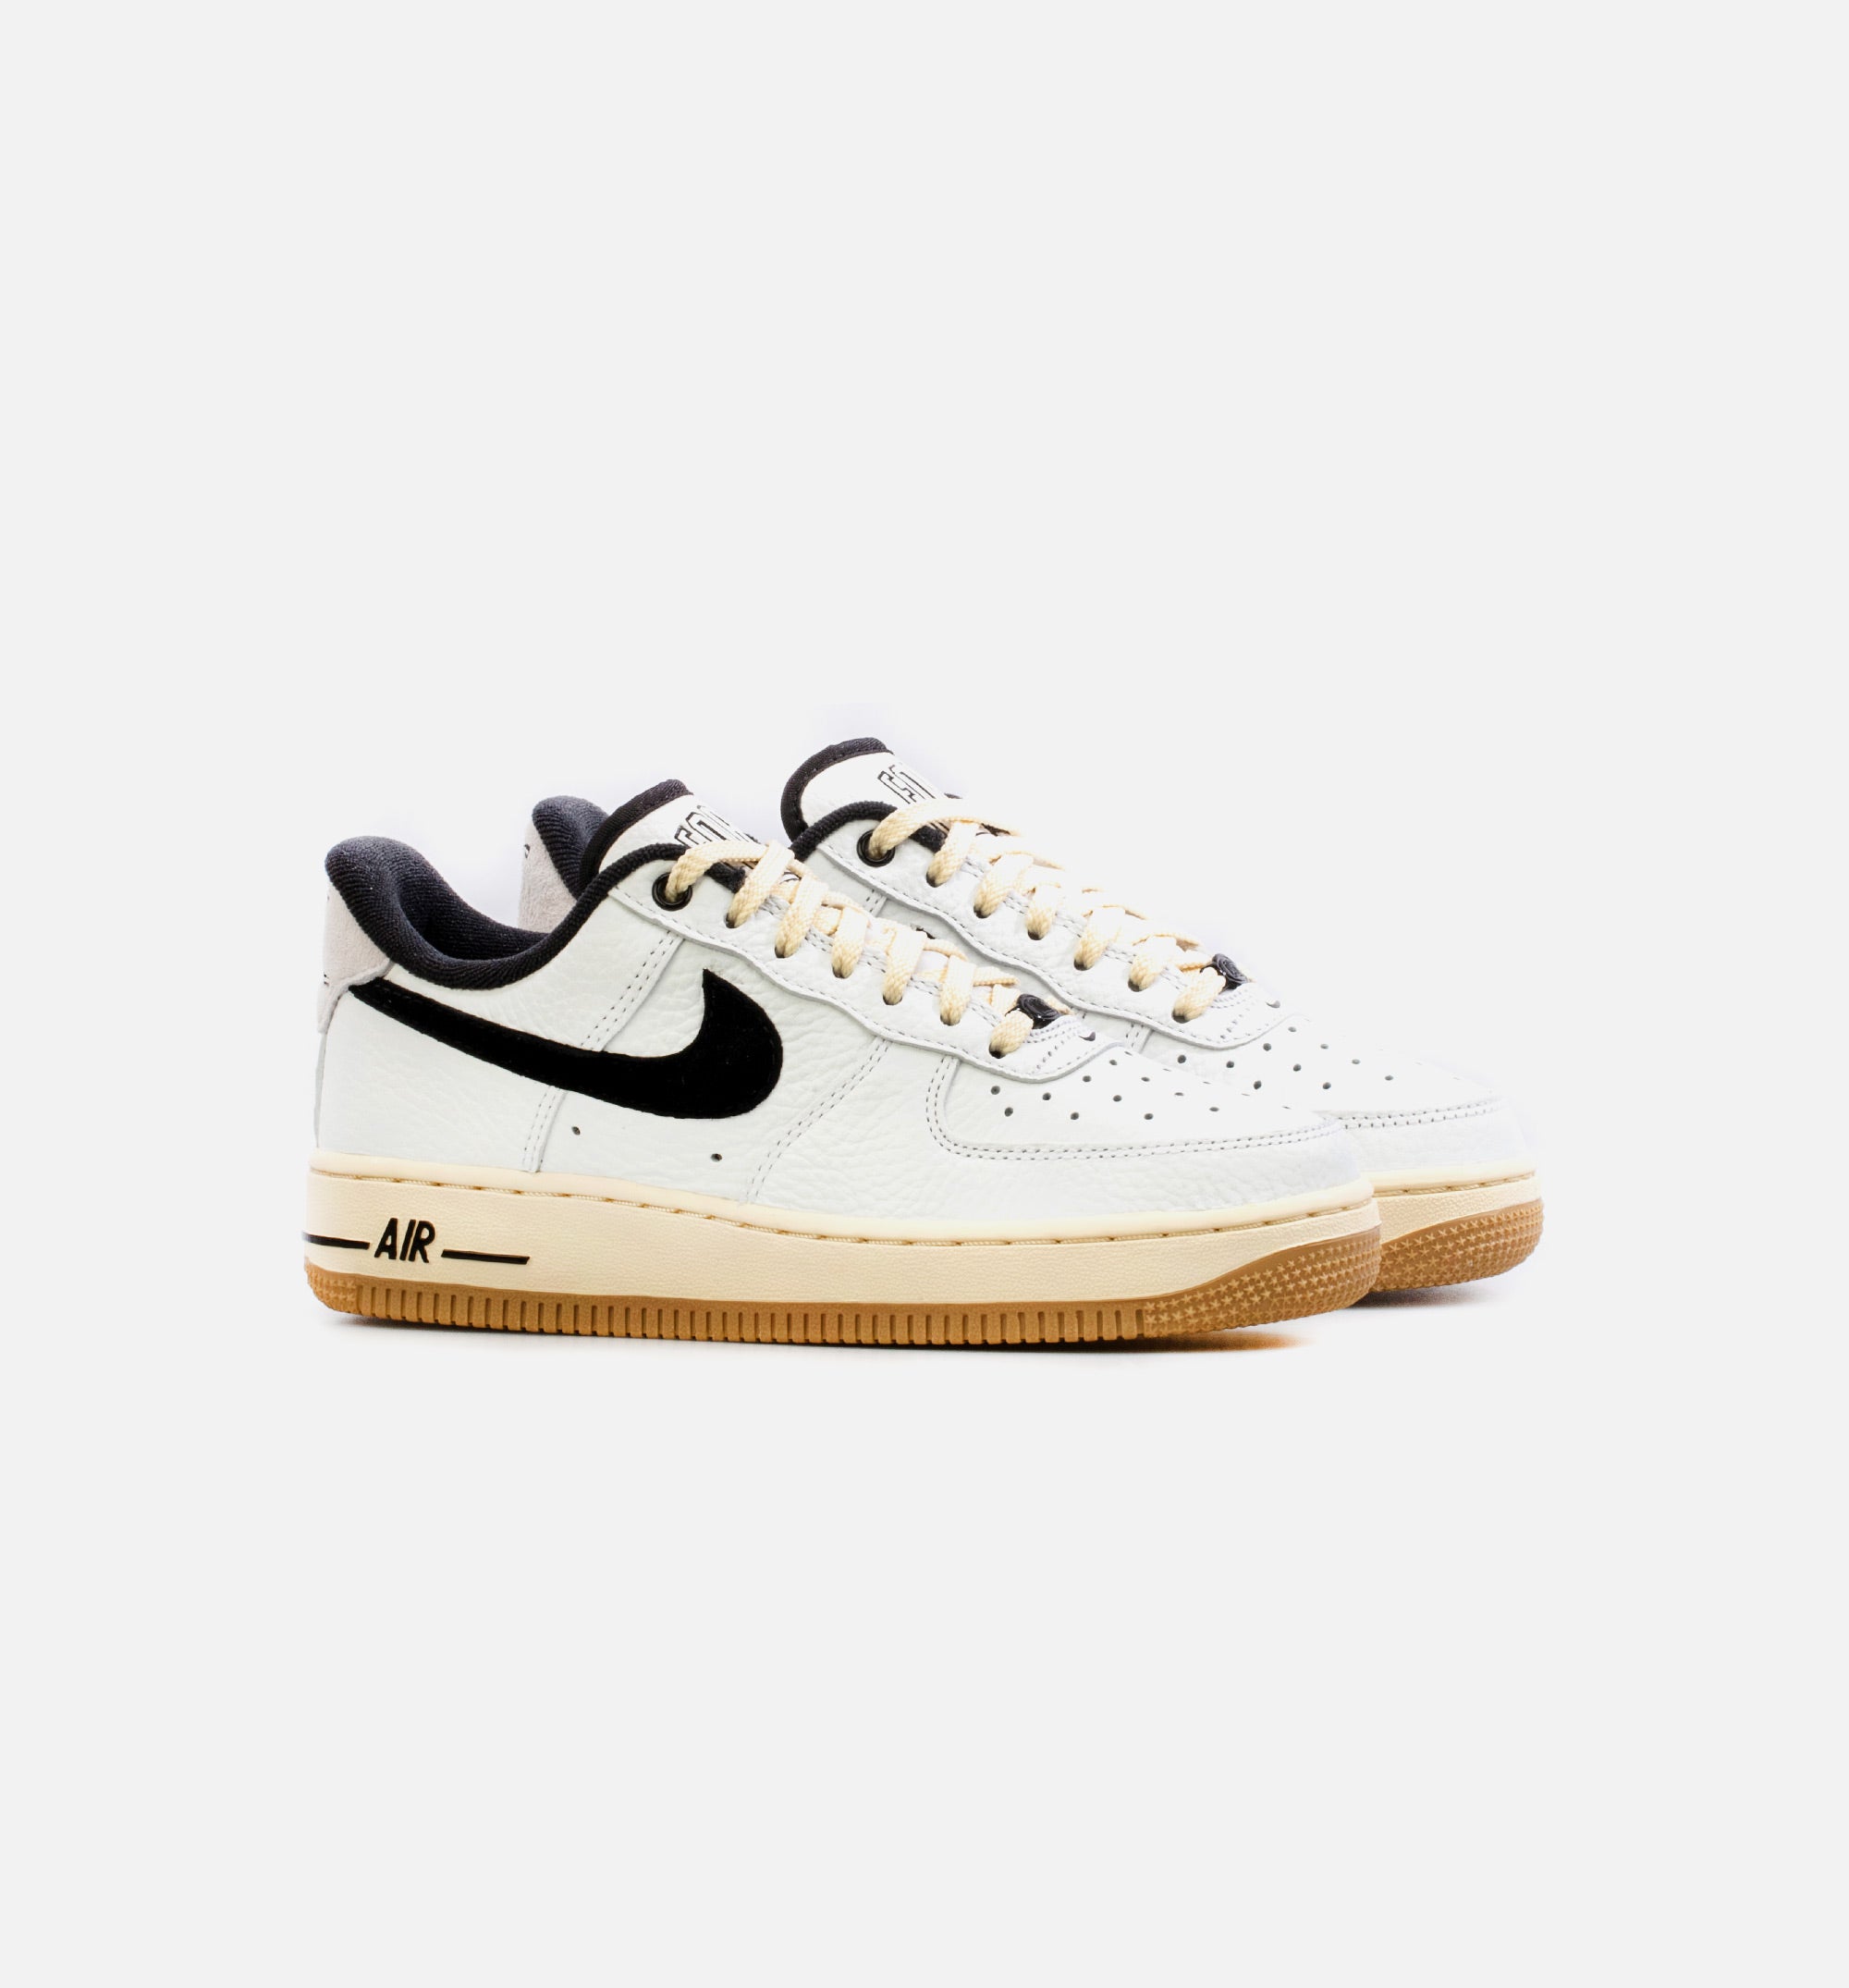 WMNS Air Force 1 Low Command Force Black